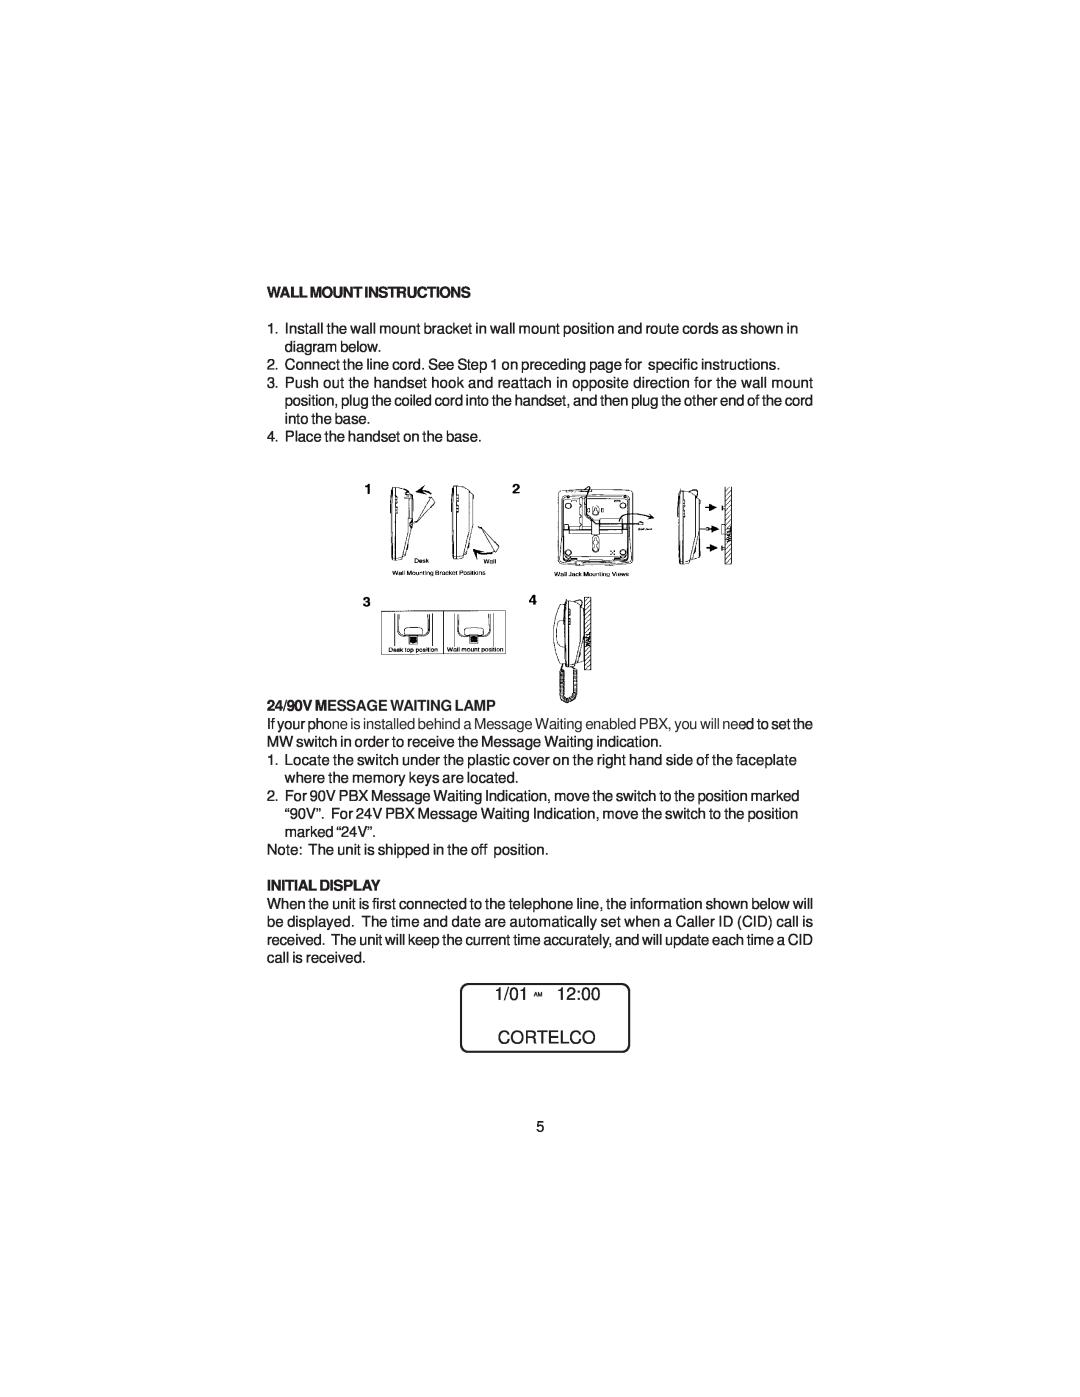 Cortelco 2211 instruction manual 1/01 AM CORTELCO, Wall Mount Instructions, 24/90V MESSAGE WAITING LAMP, Initial Display 